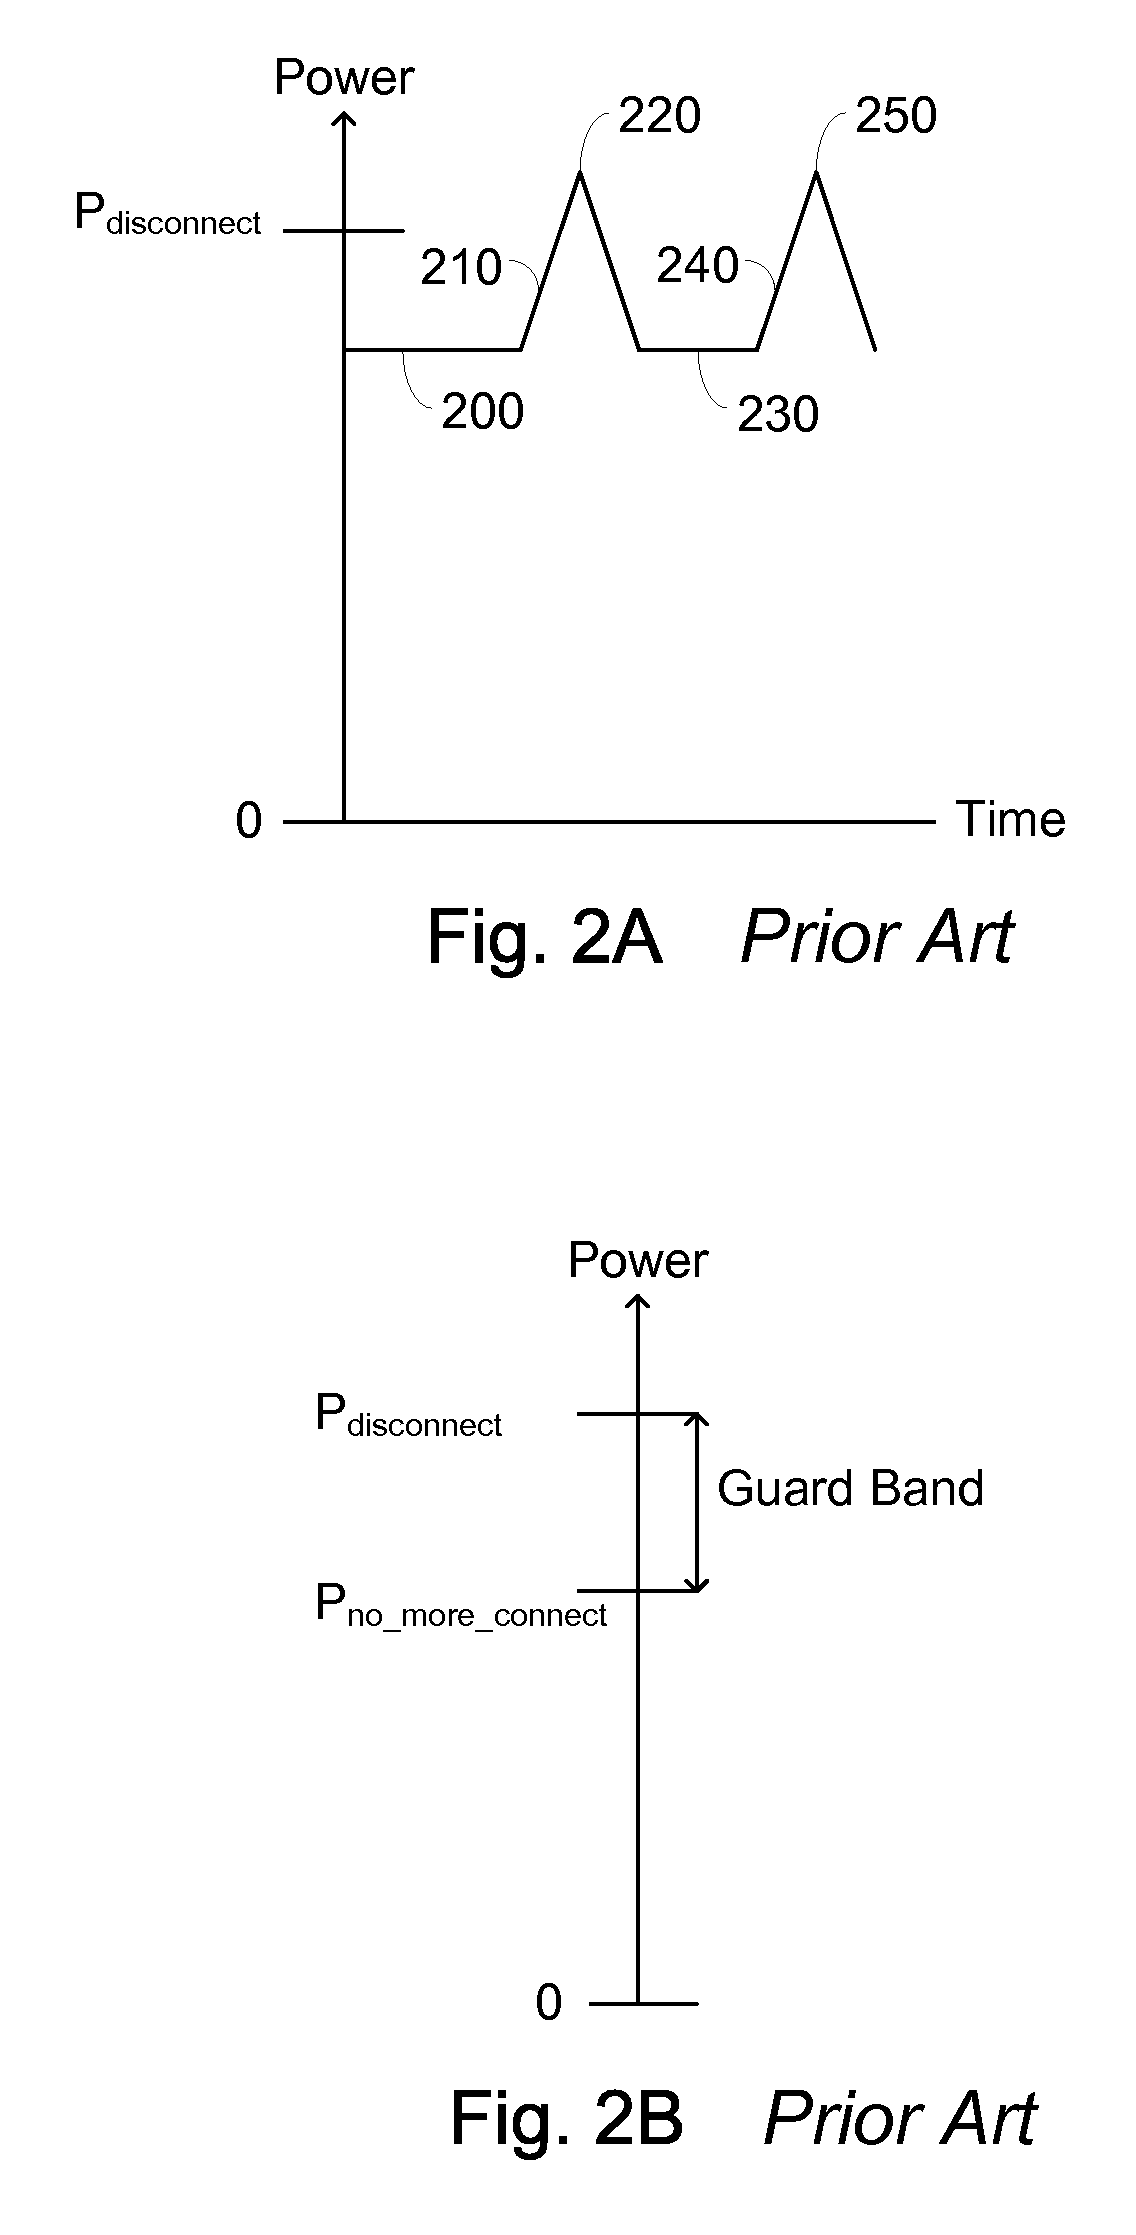 Reduced Guard Band for Power Over Ethernet